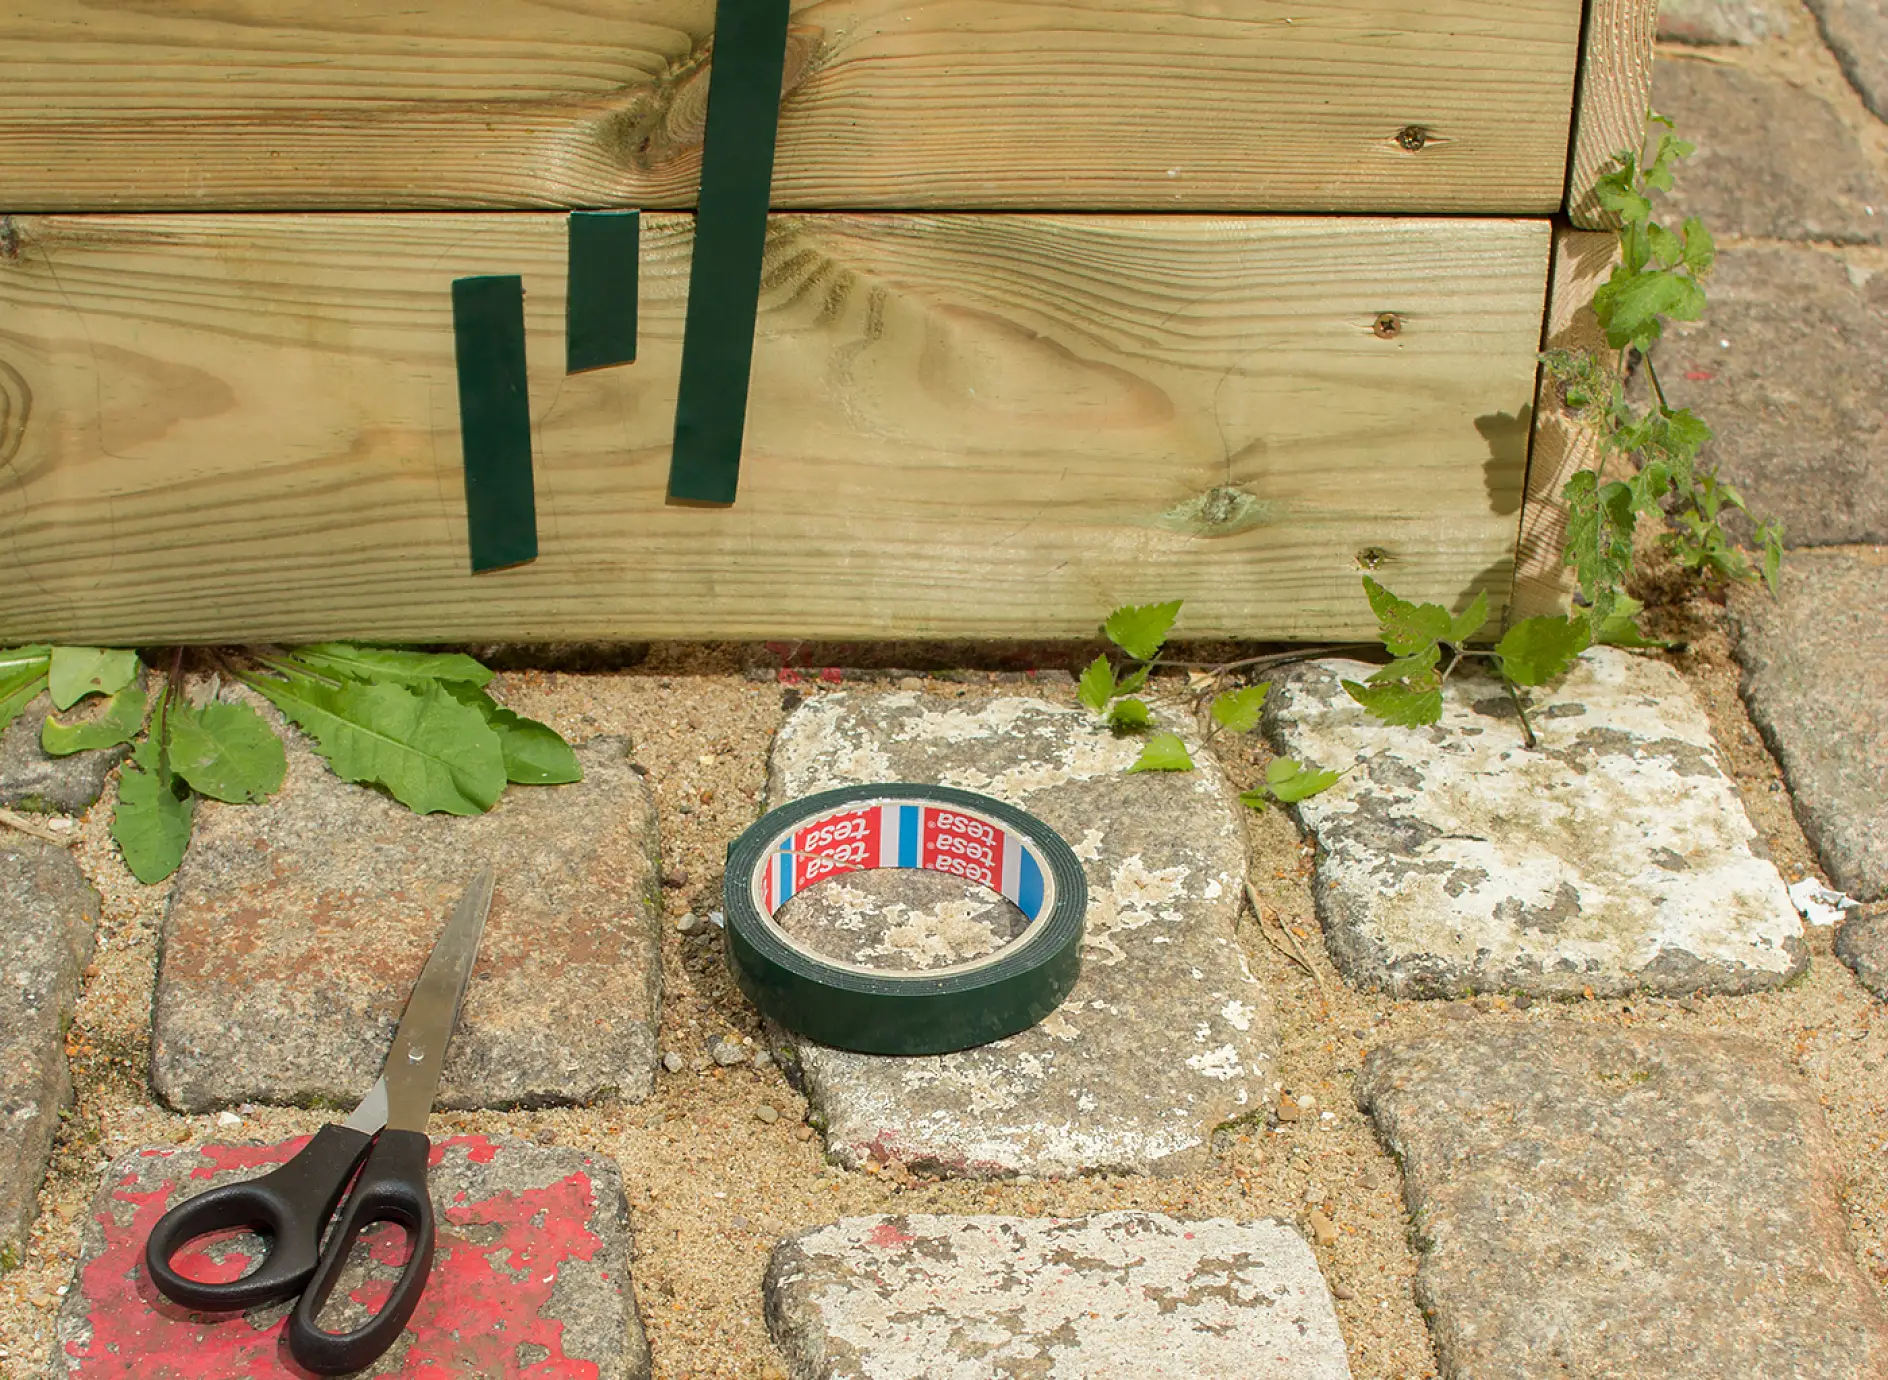 Scissors, tesa Powerbond® OUTDOOR adhesive tape and strips of tape applied to sandbox.